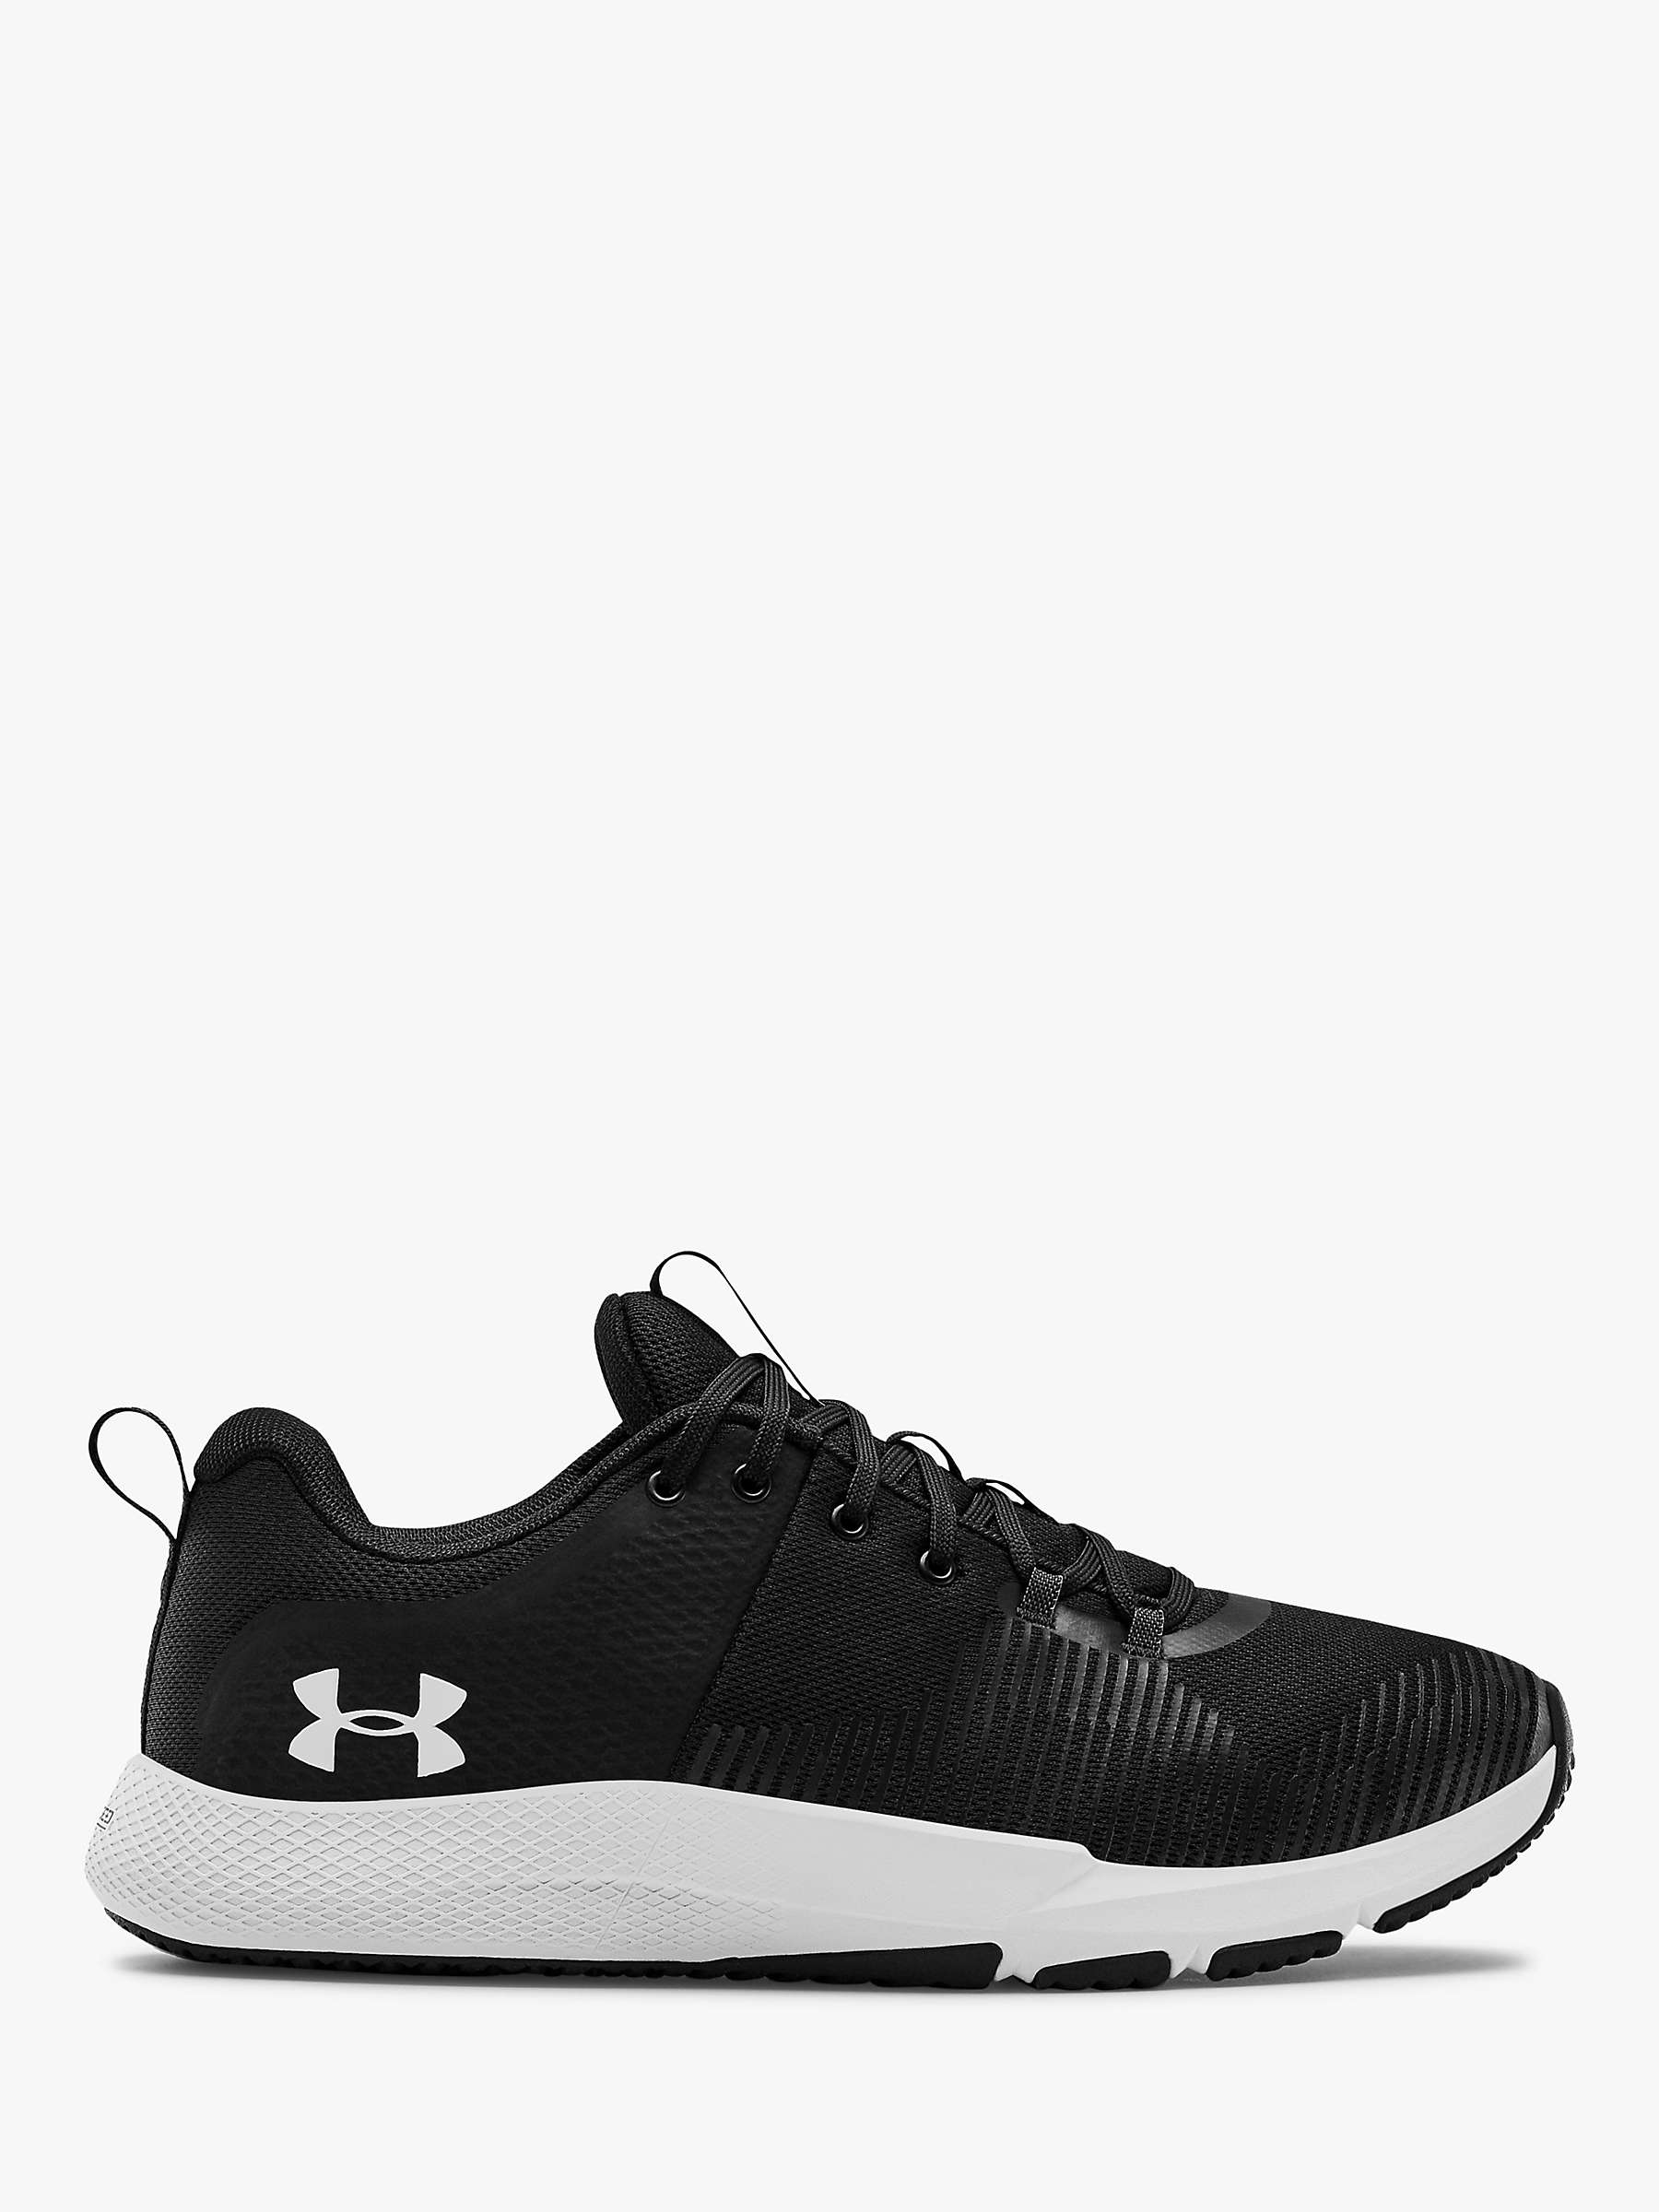 Under Armour Mens Charged Engage Cross Trainer